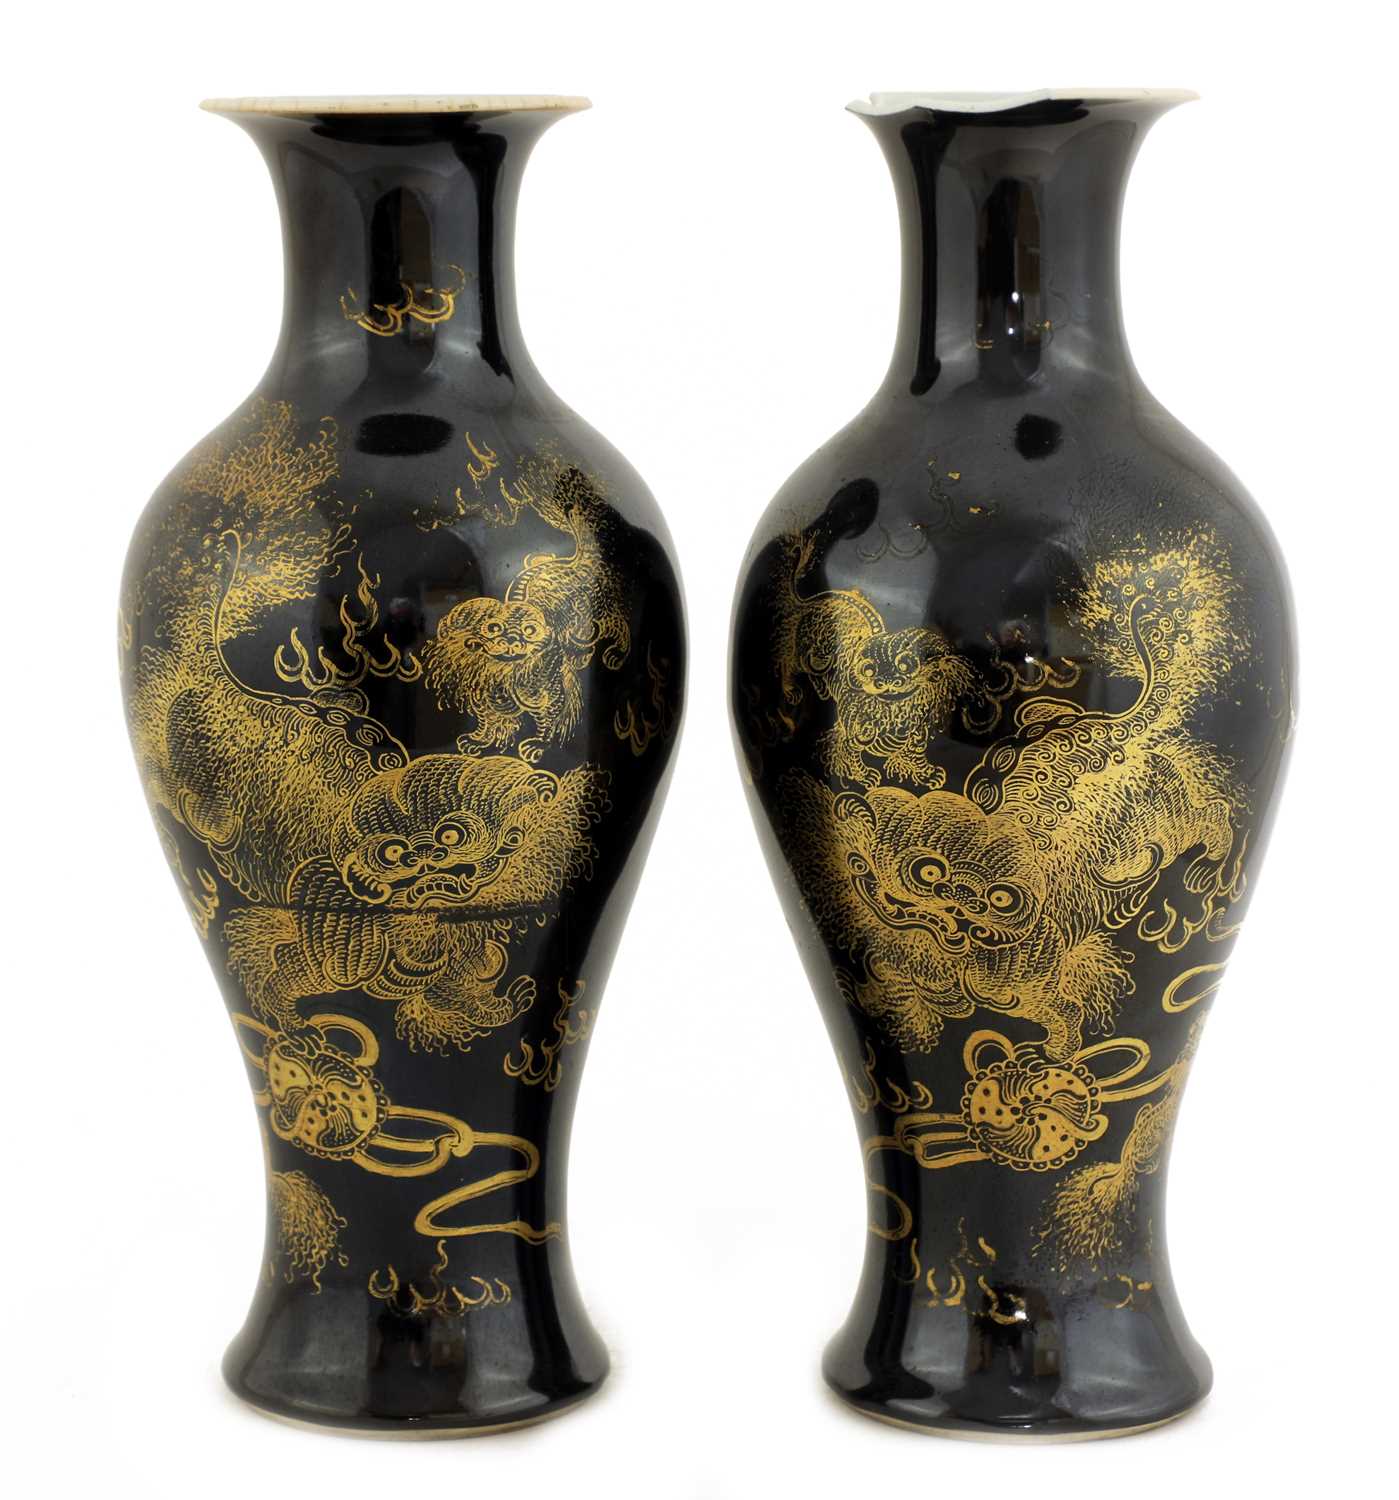 Lot 27 - A pair of Chinese black-glazed vases